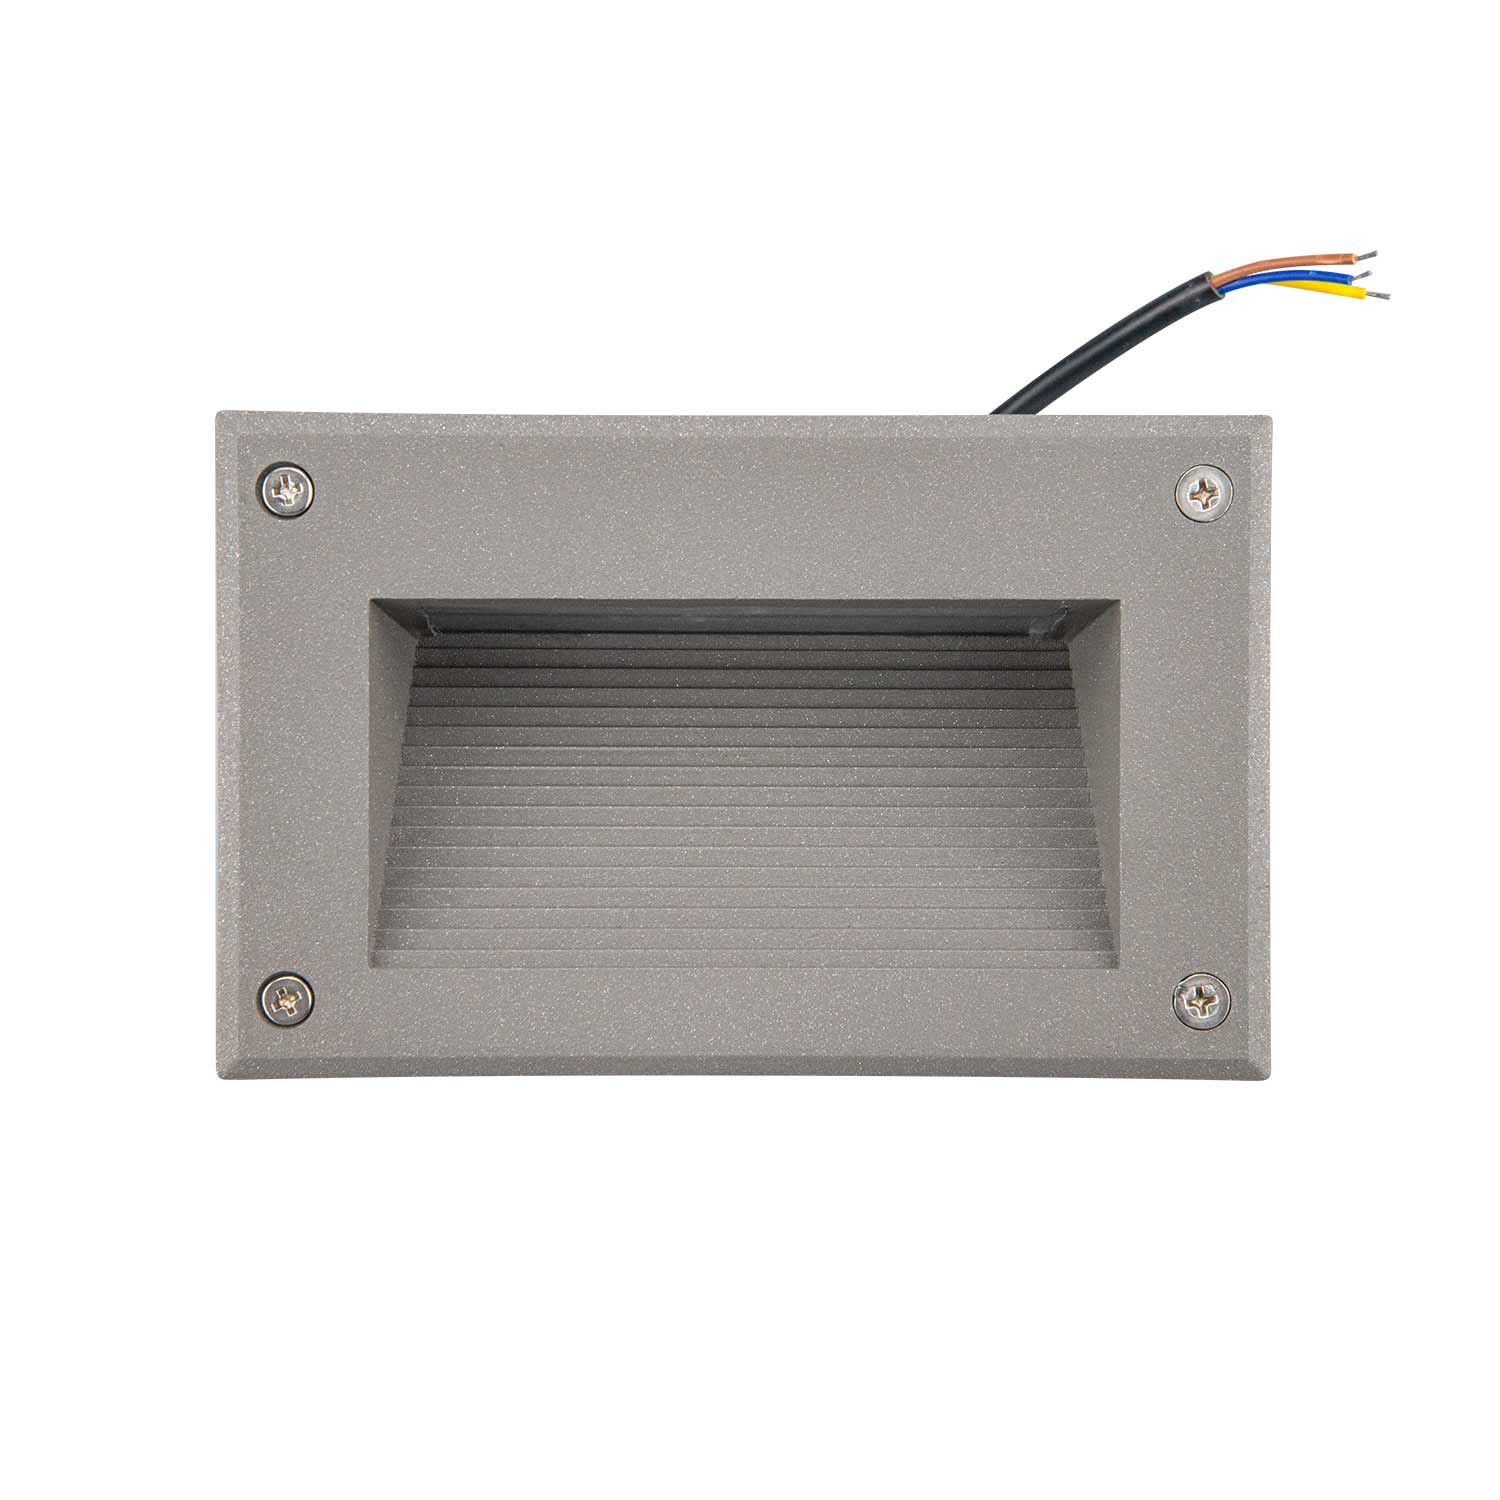 Baliza 5W LED empotrable 4000K exterior gris